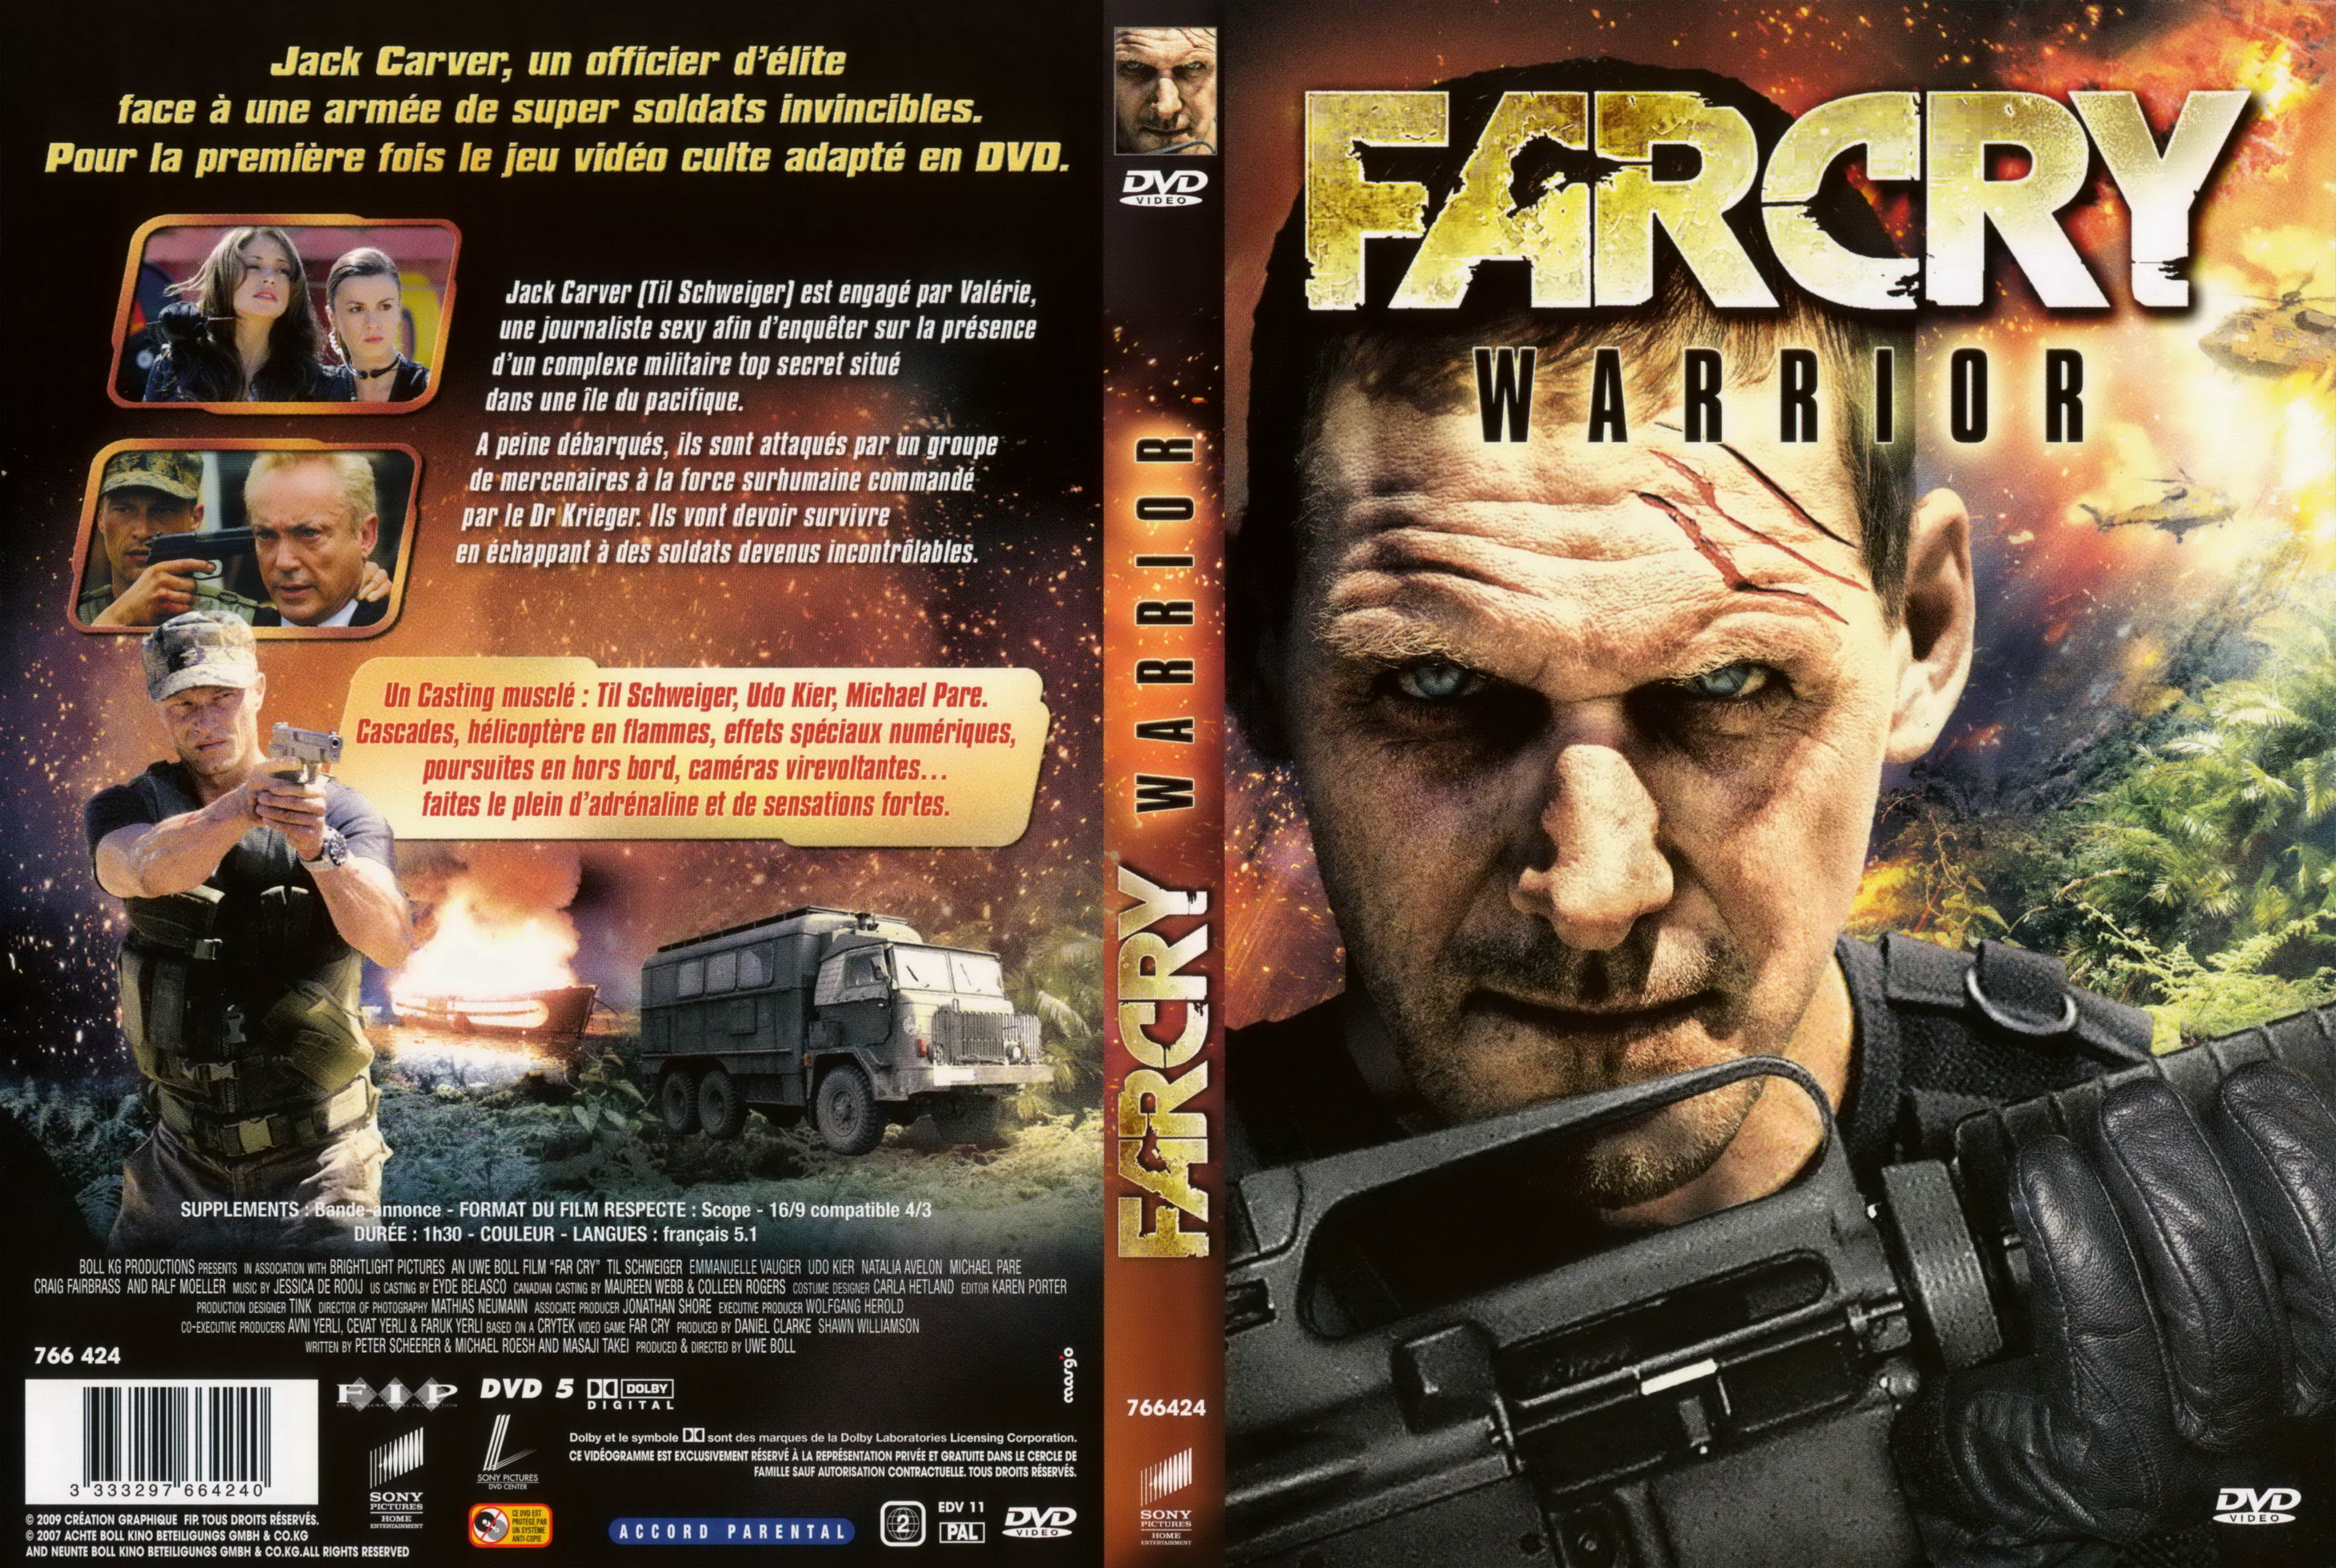 Jaquette DVD Far cry warrior